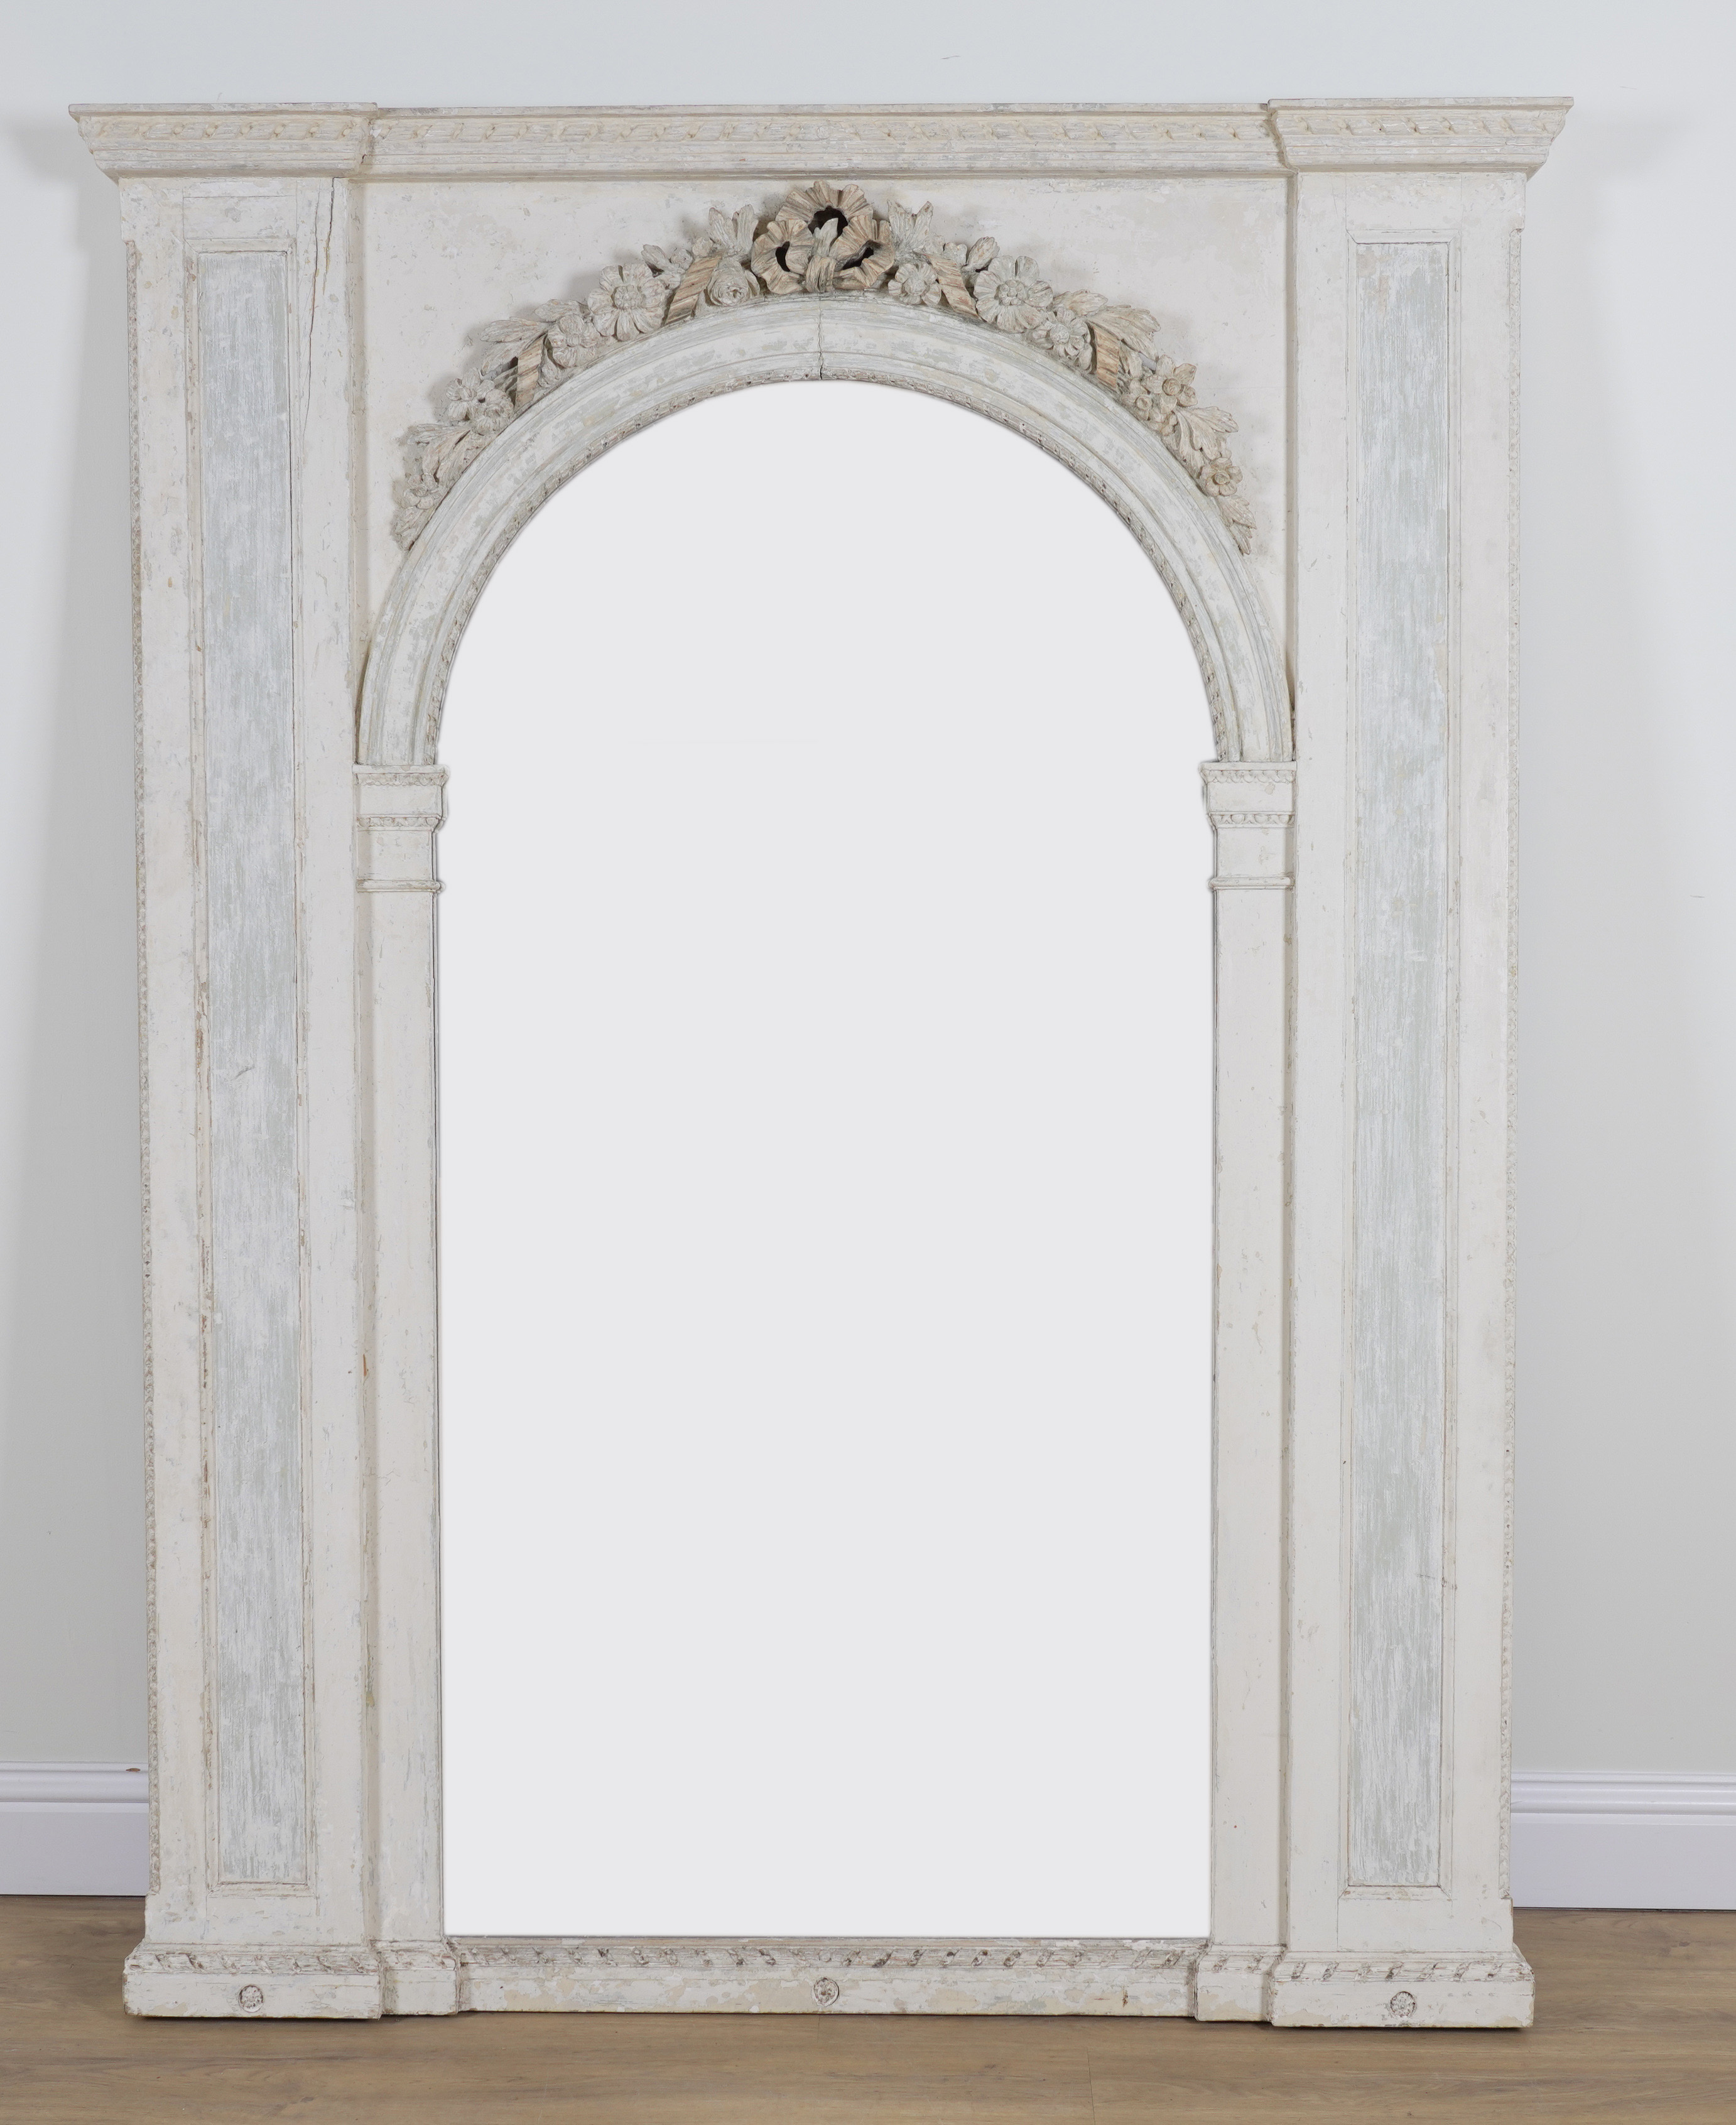 A LARGE 19TH CENTURY ARCH TOP MIRROR